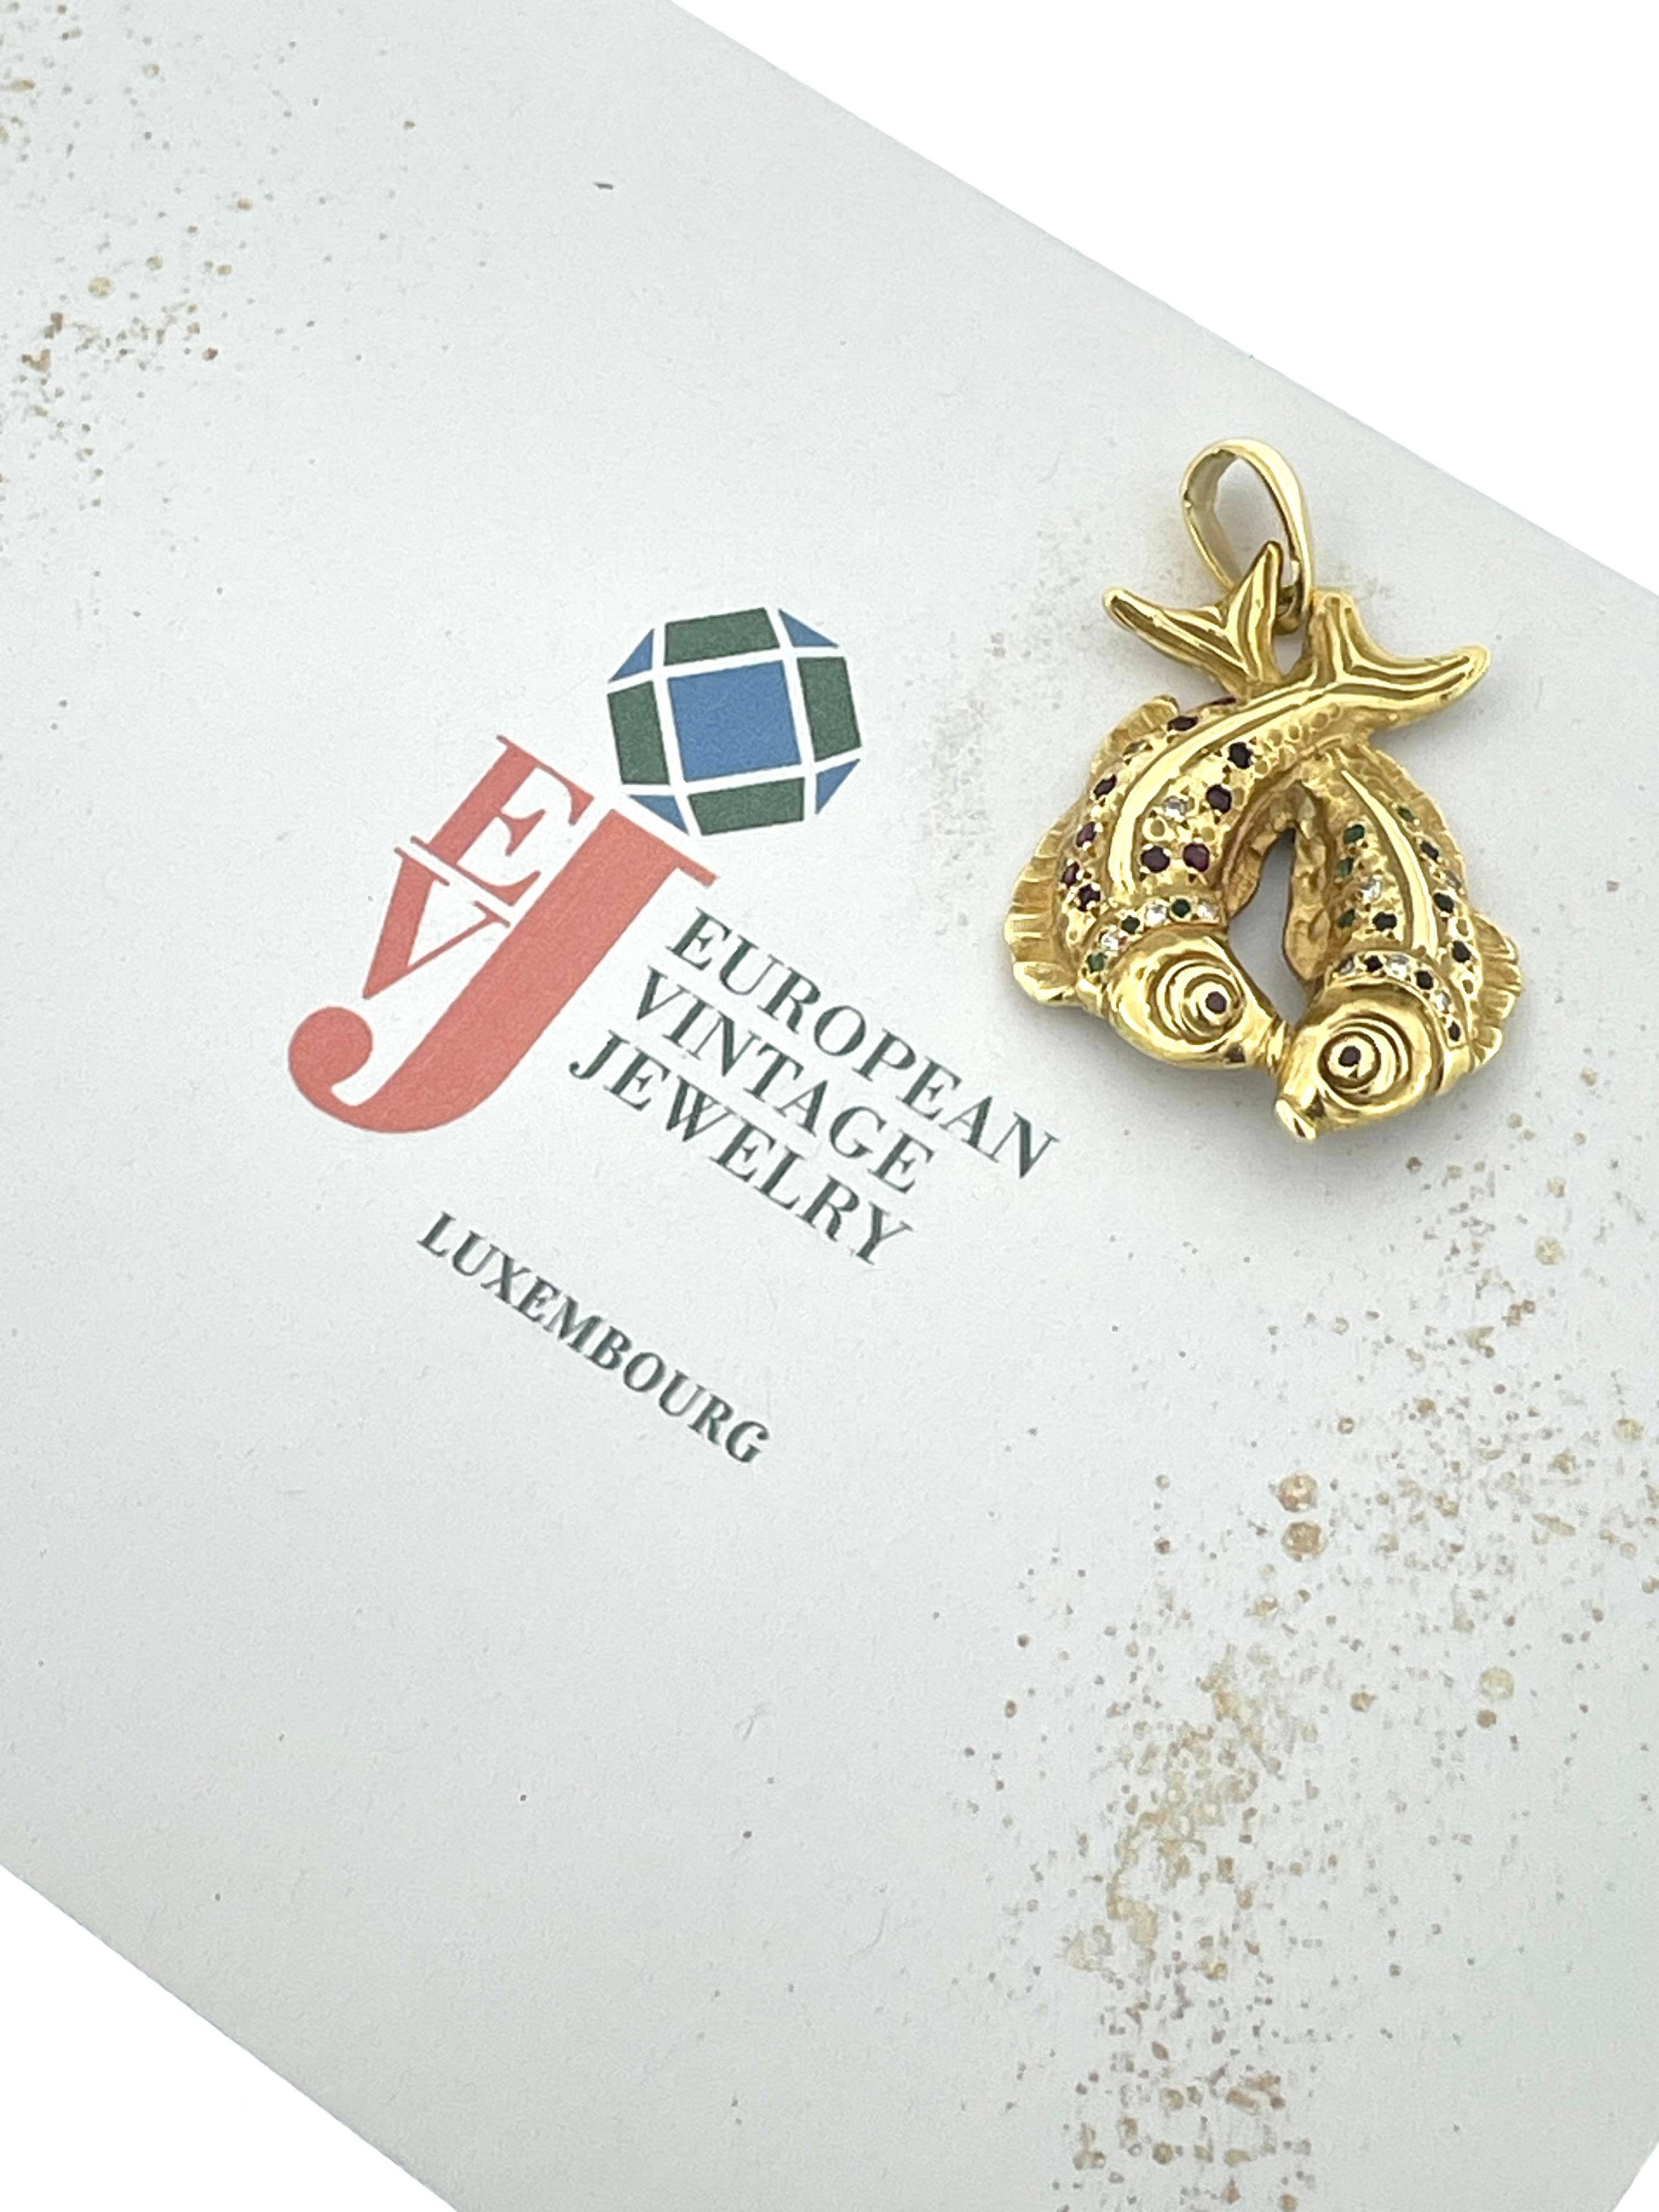 The Vintage Yellow Gold Pisces Zodiac Sign Pendant is a stunning and intricately crafted piece of jewelry that exudes elegance and charm. Crafted from high-quality 18kt yellow gold, this pendant showcases exquisite artistry and attention to